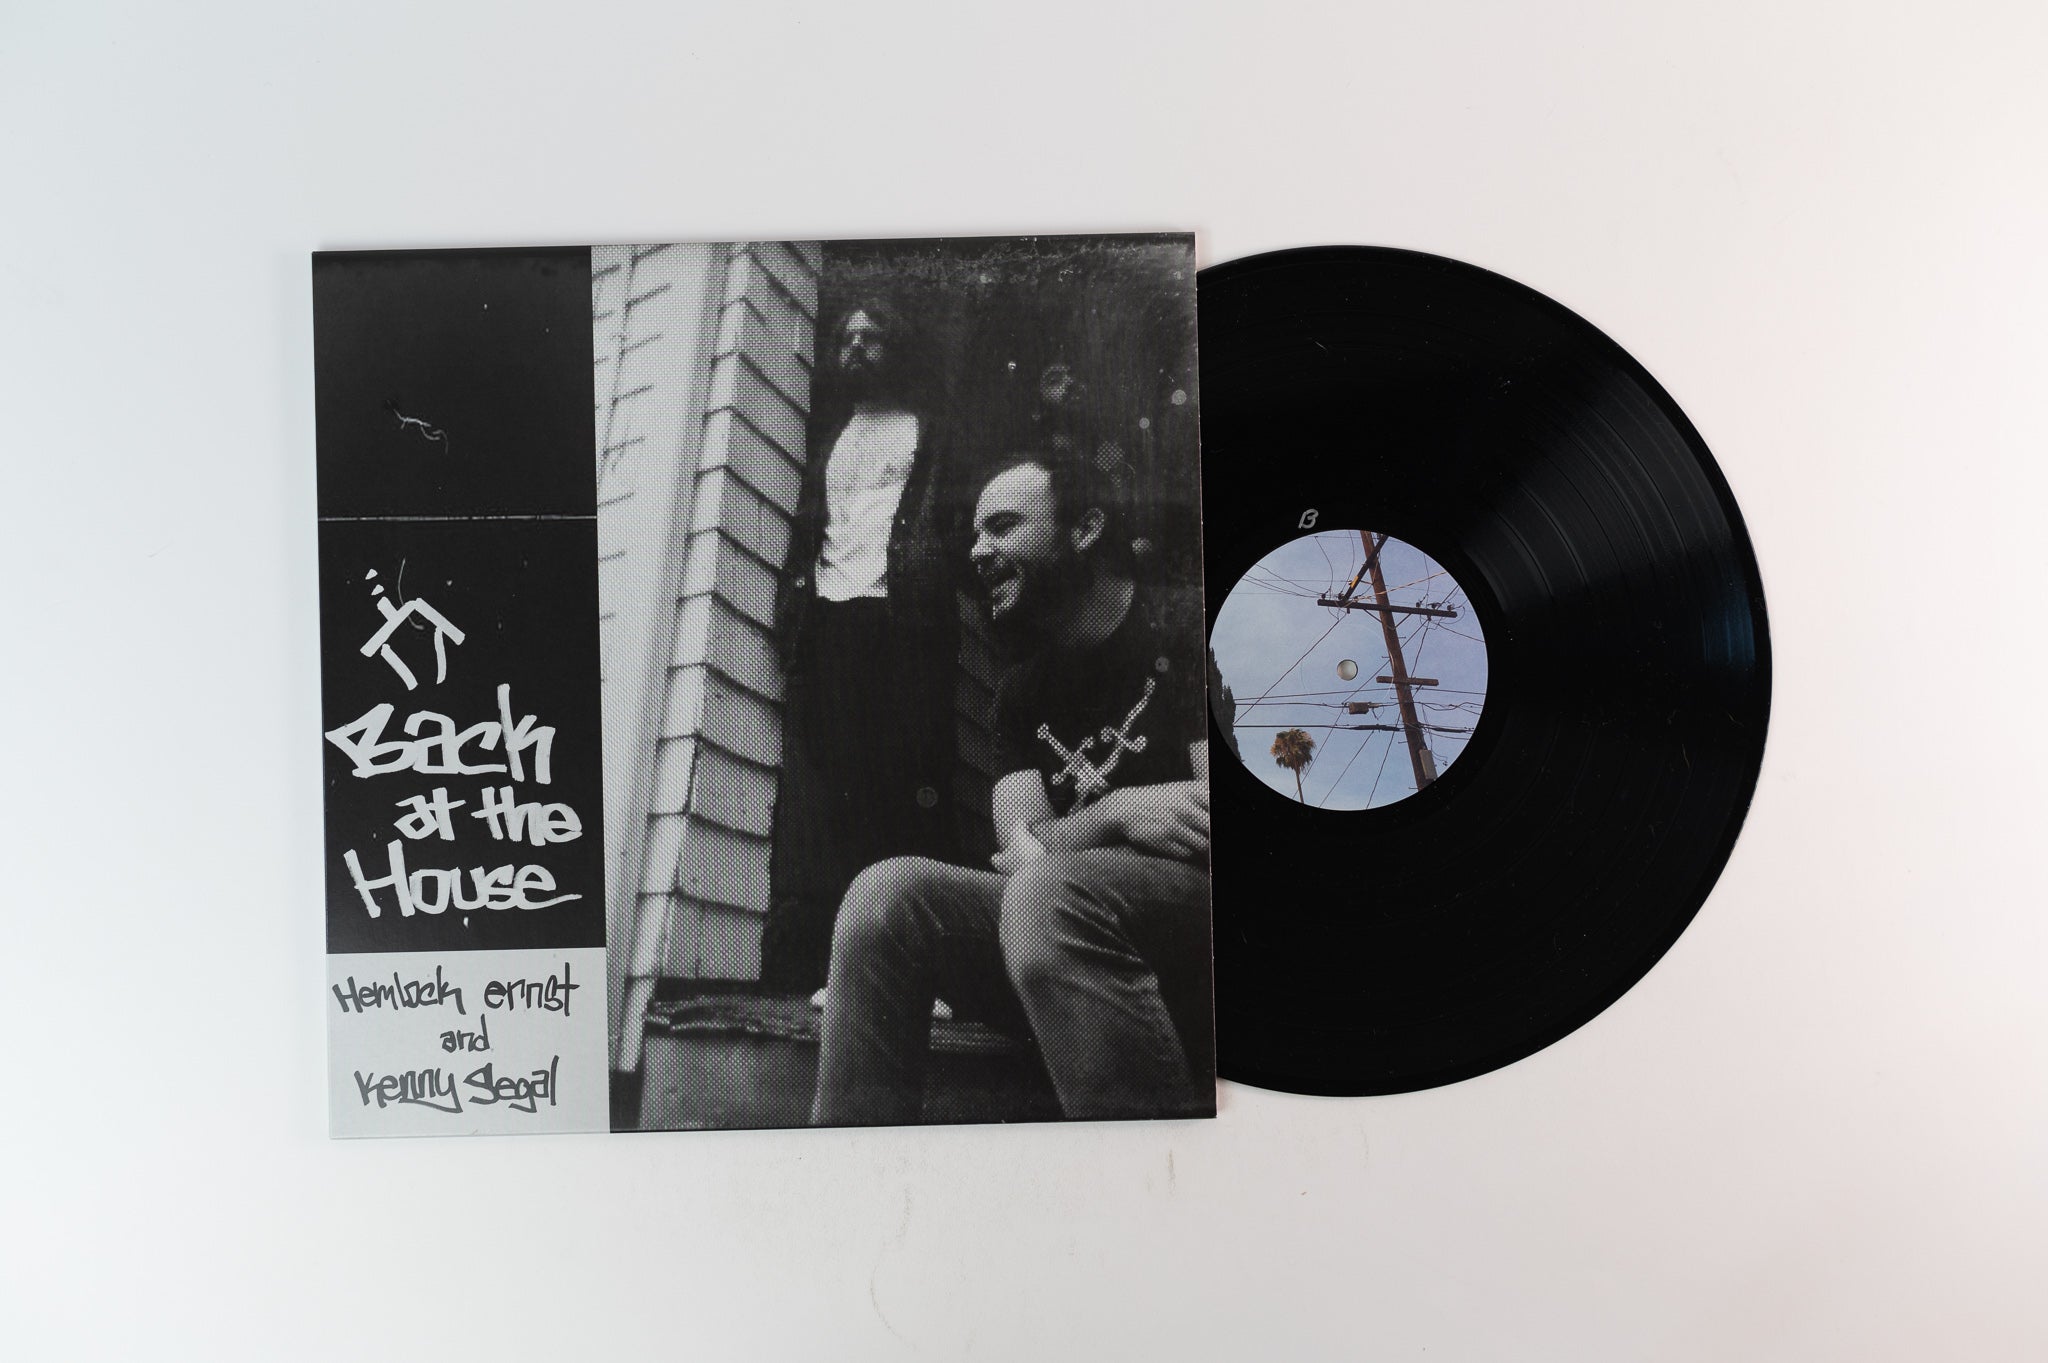 Hemlock Ernst & Kenny Segal - Back At The House on Ruby Yacht Repress